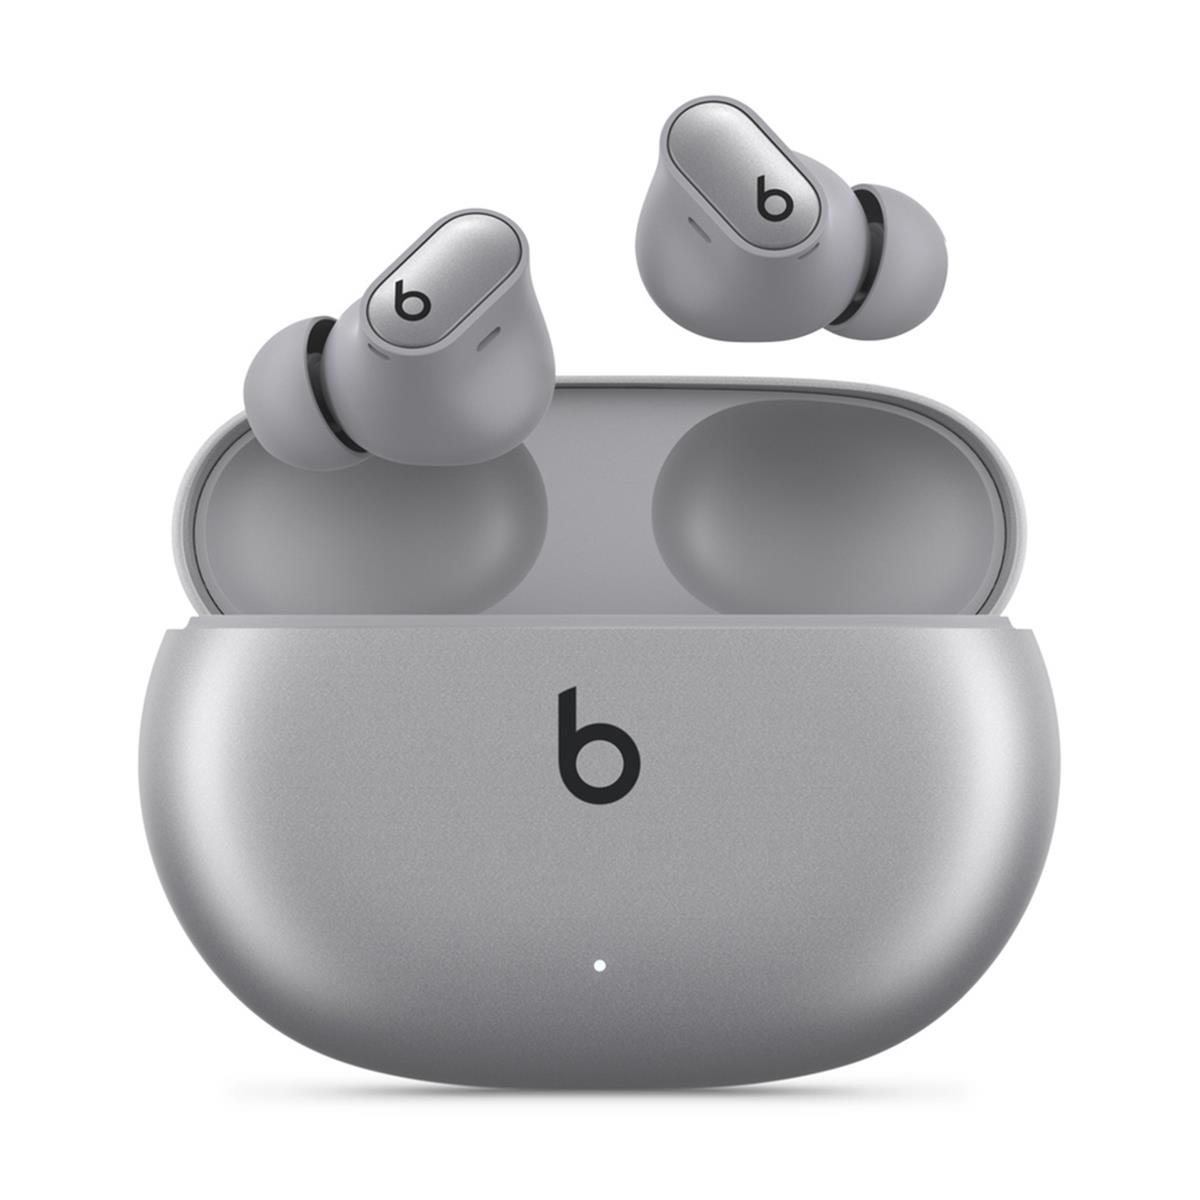 Image of Beats by Dr. Dre Beats Studio Buds + Wireless Noise-Canceling Earbuds